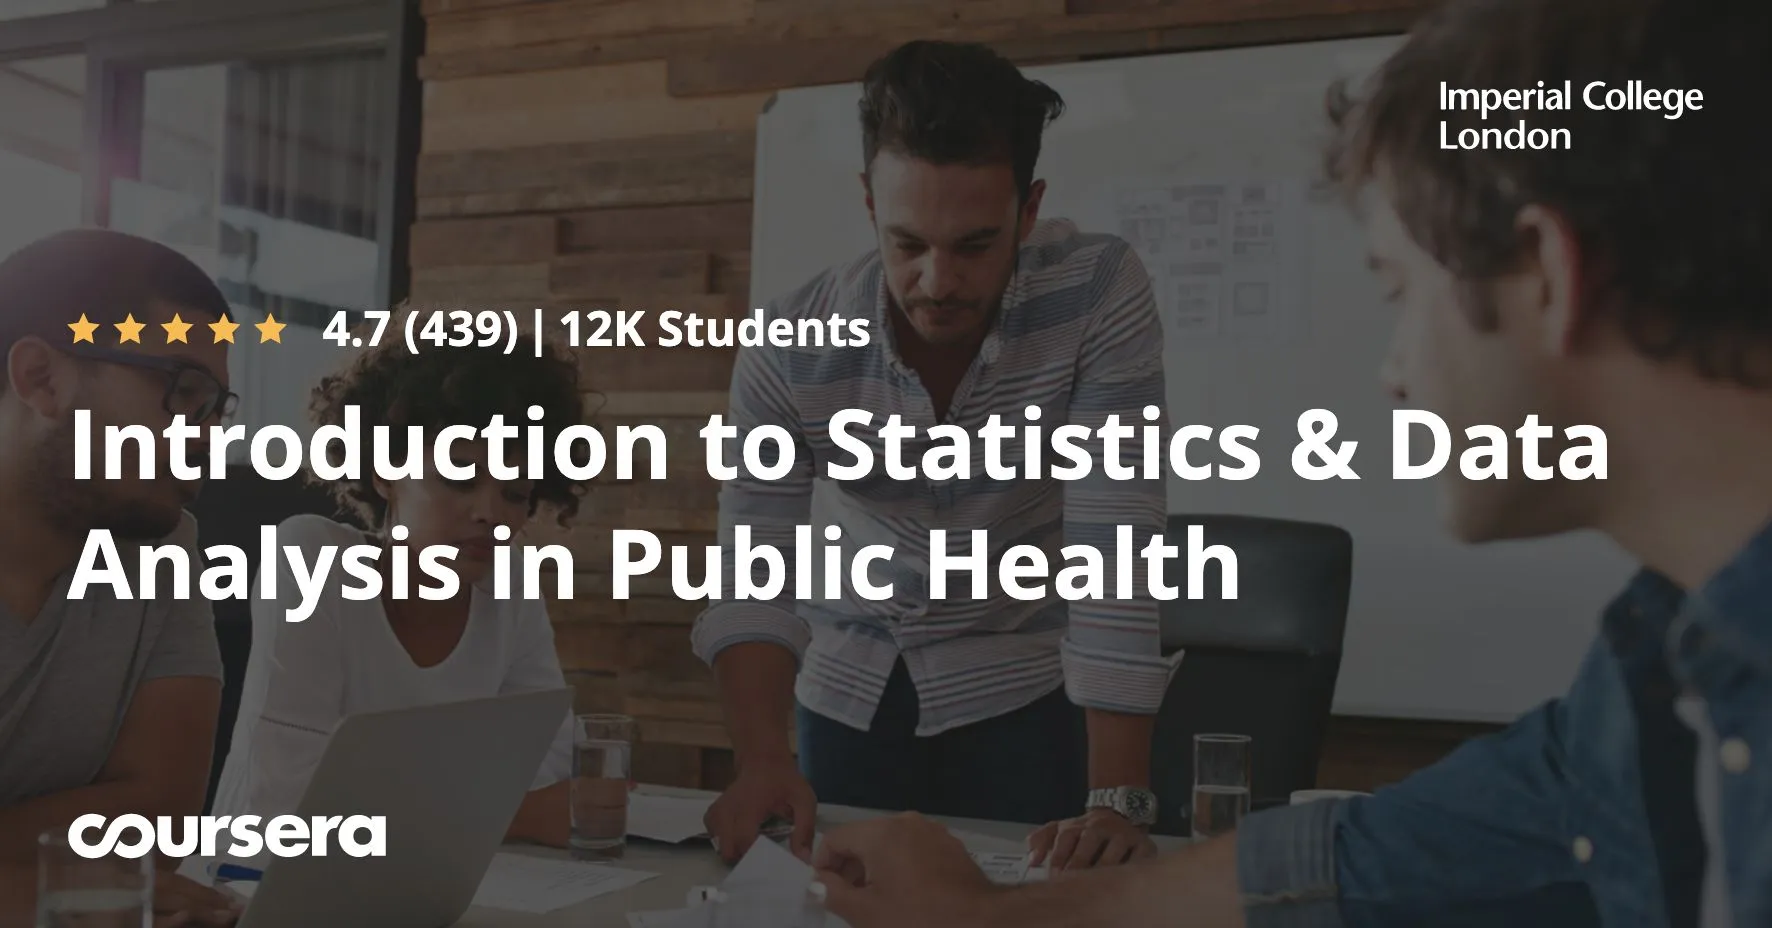 Introduction to Statistics & Data Analysis in Public Health